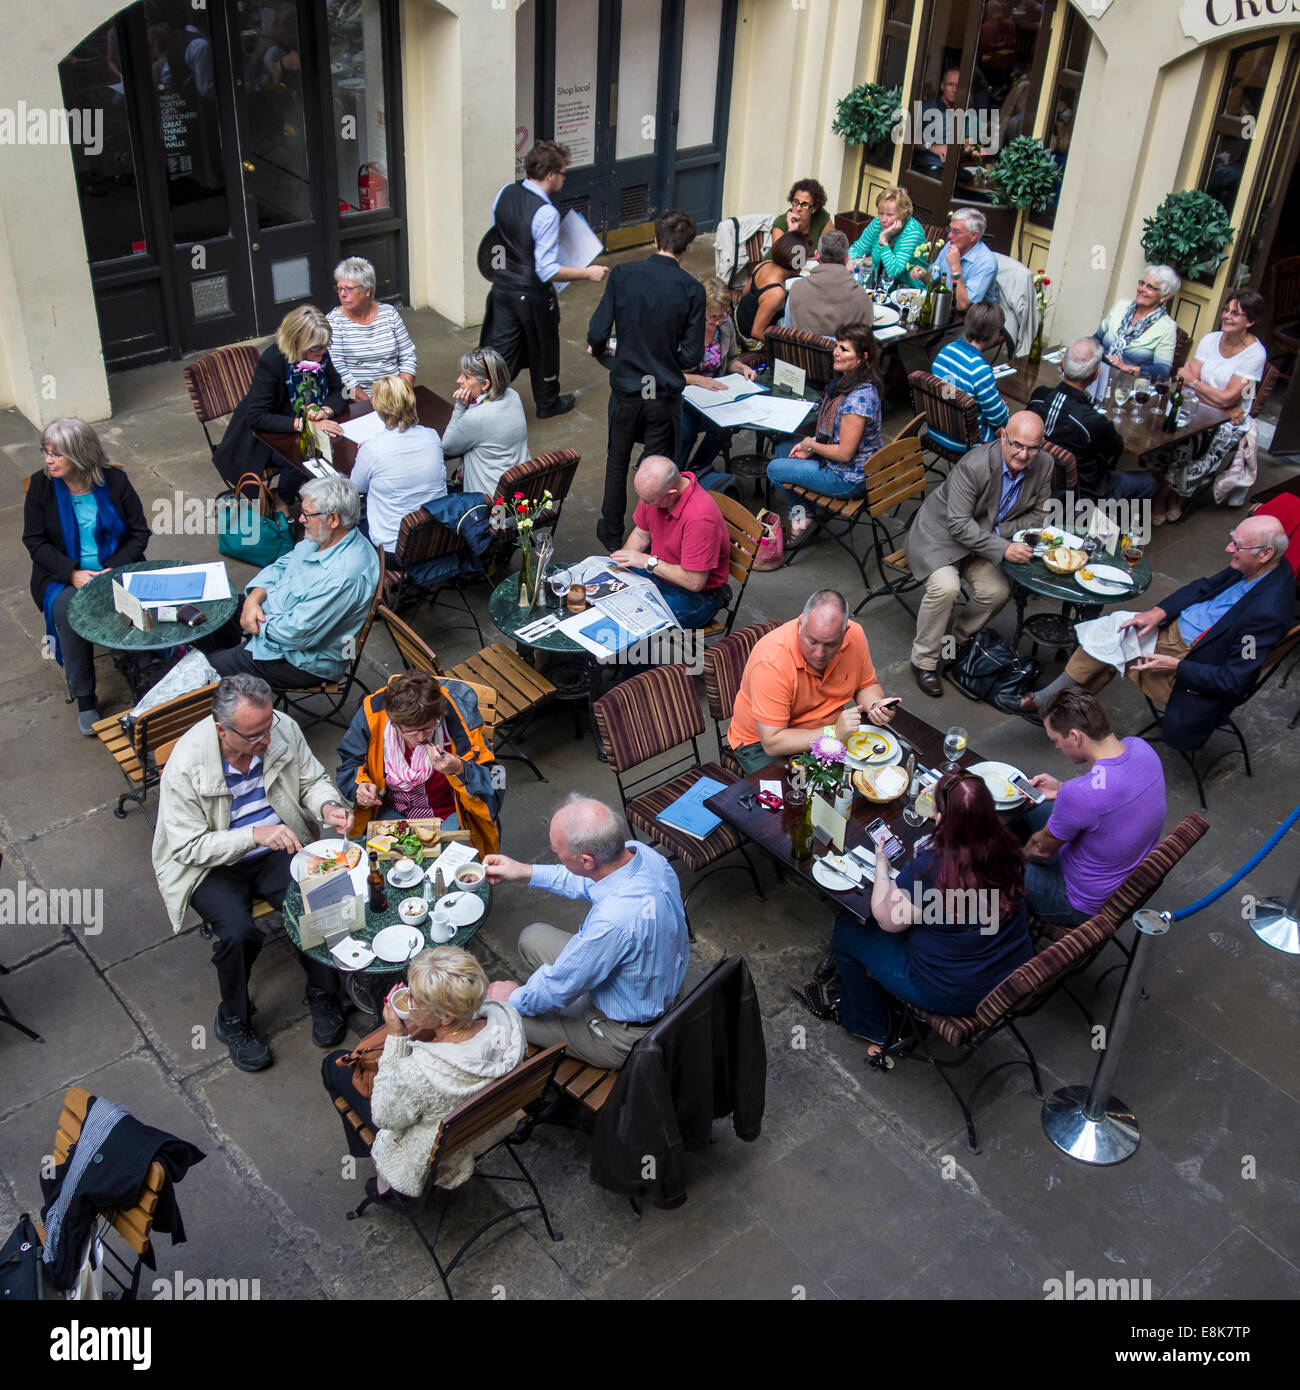 People Dining at Davys Covent Garden Market London Stock Photo